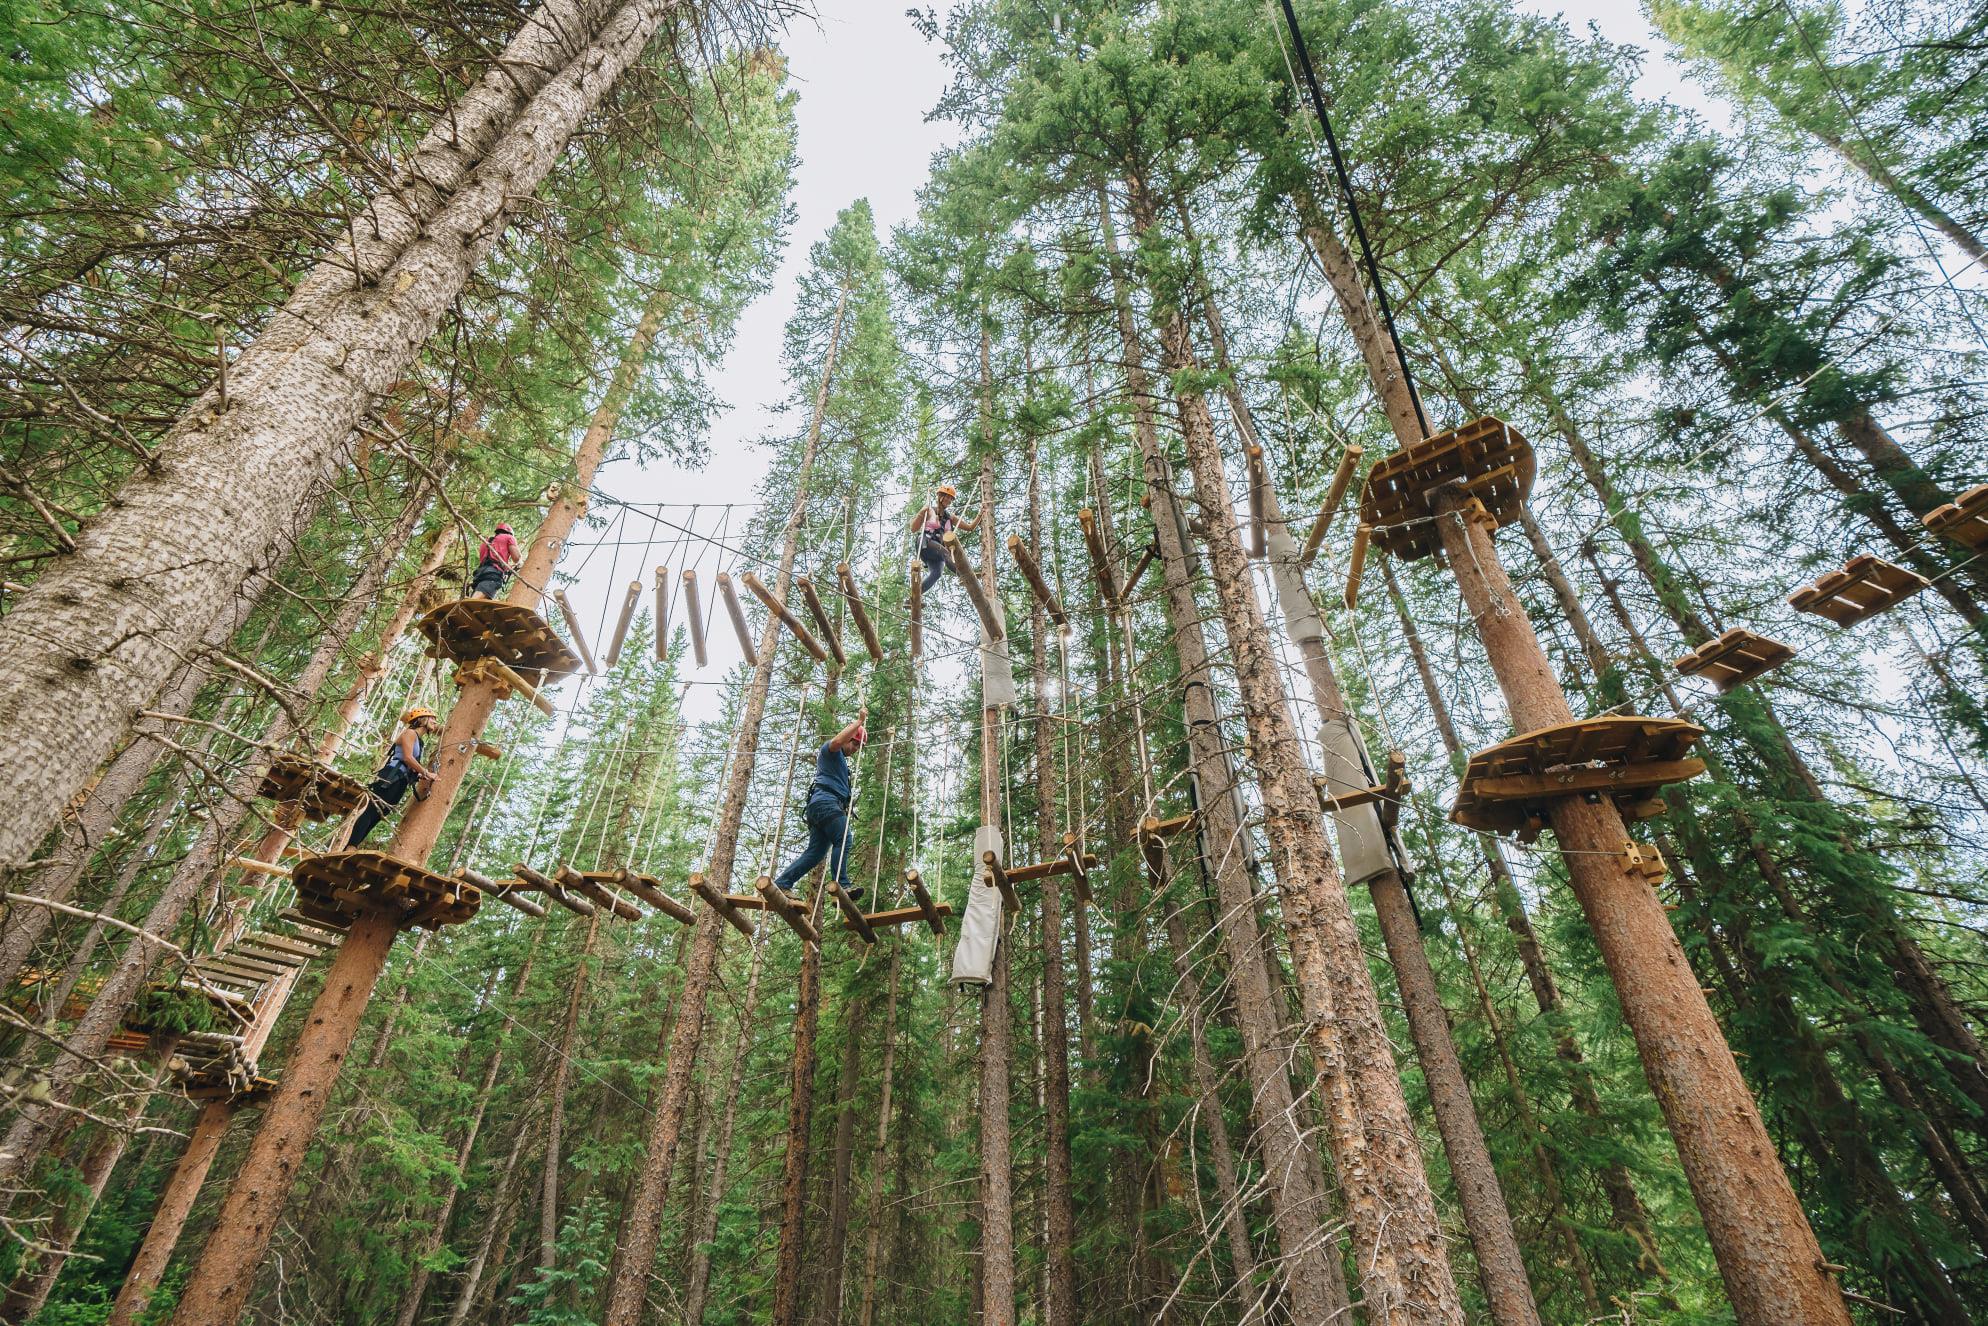 High ropes course among the trees